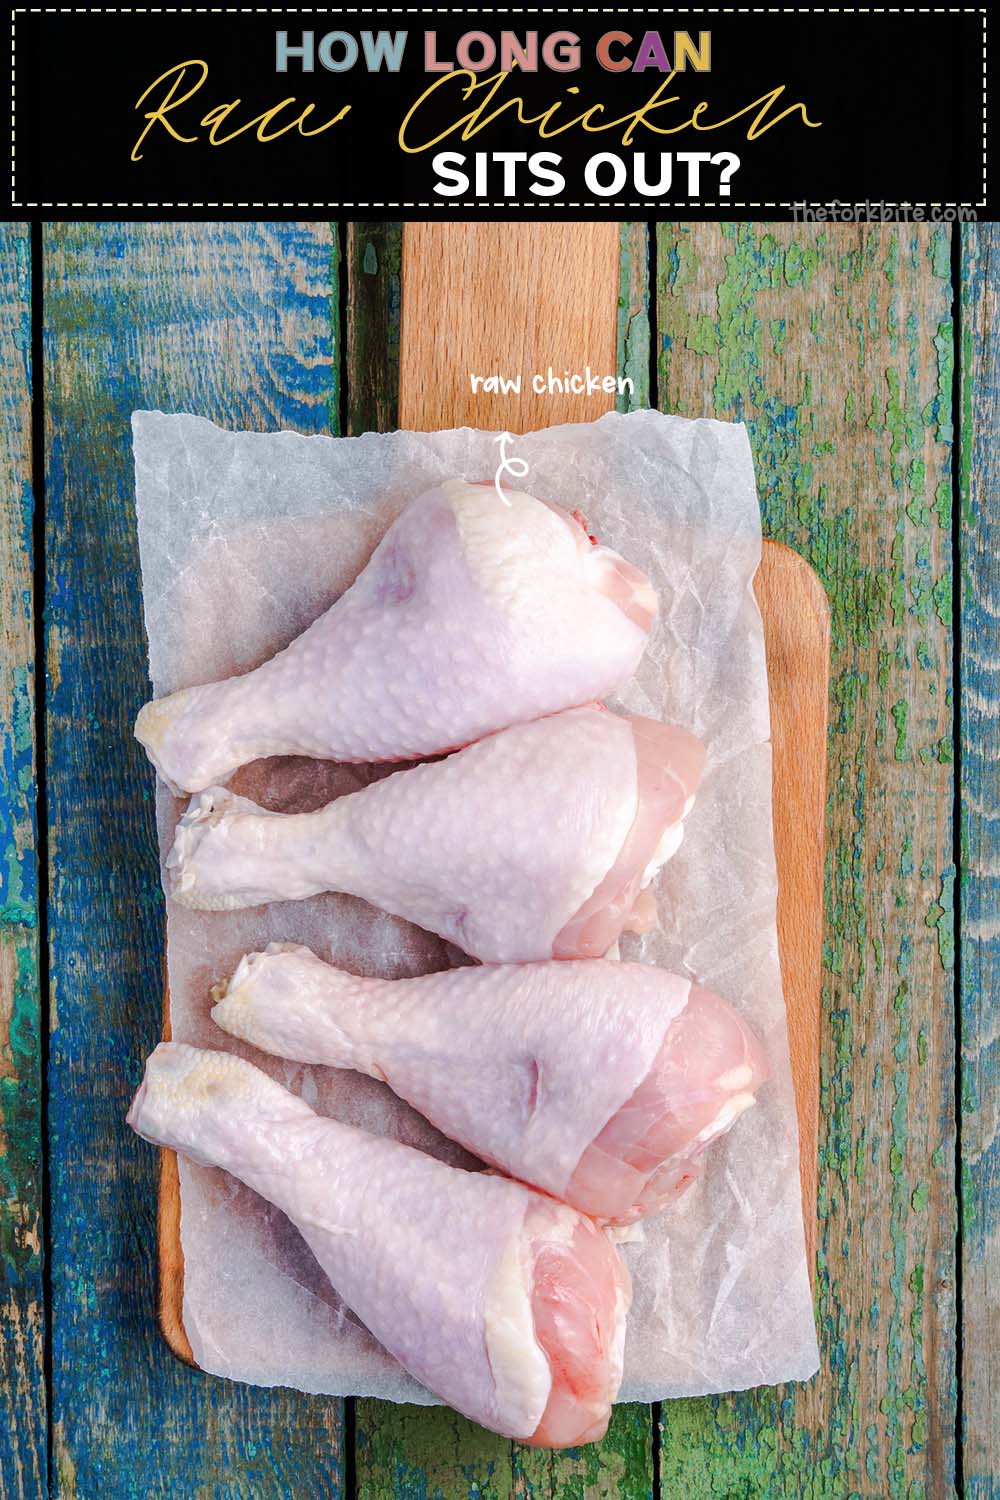 Whether we are talking cooked or uncooked poultry, it will only remain good in your fridge for a short time before beginning to go bad. If it does, it is unsafe to consume.